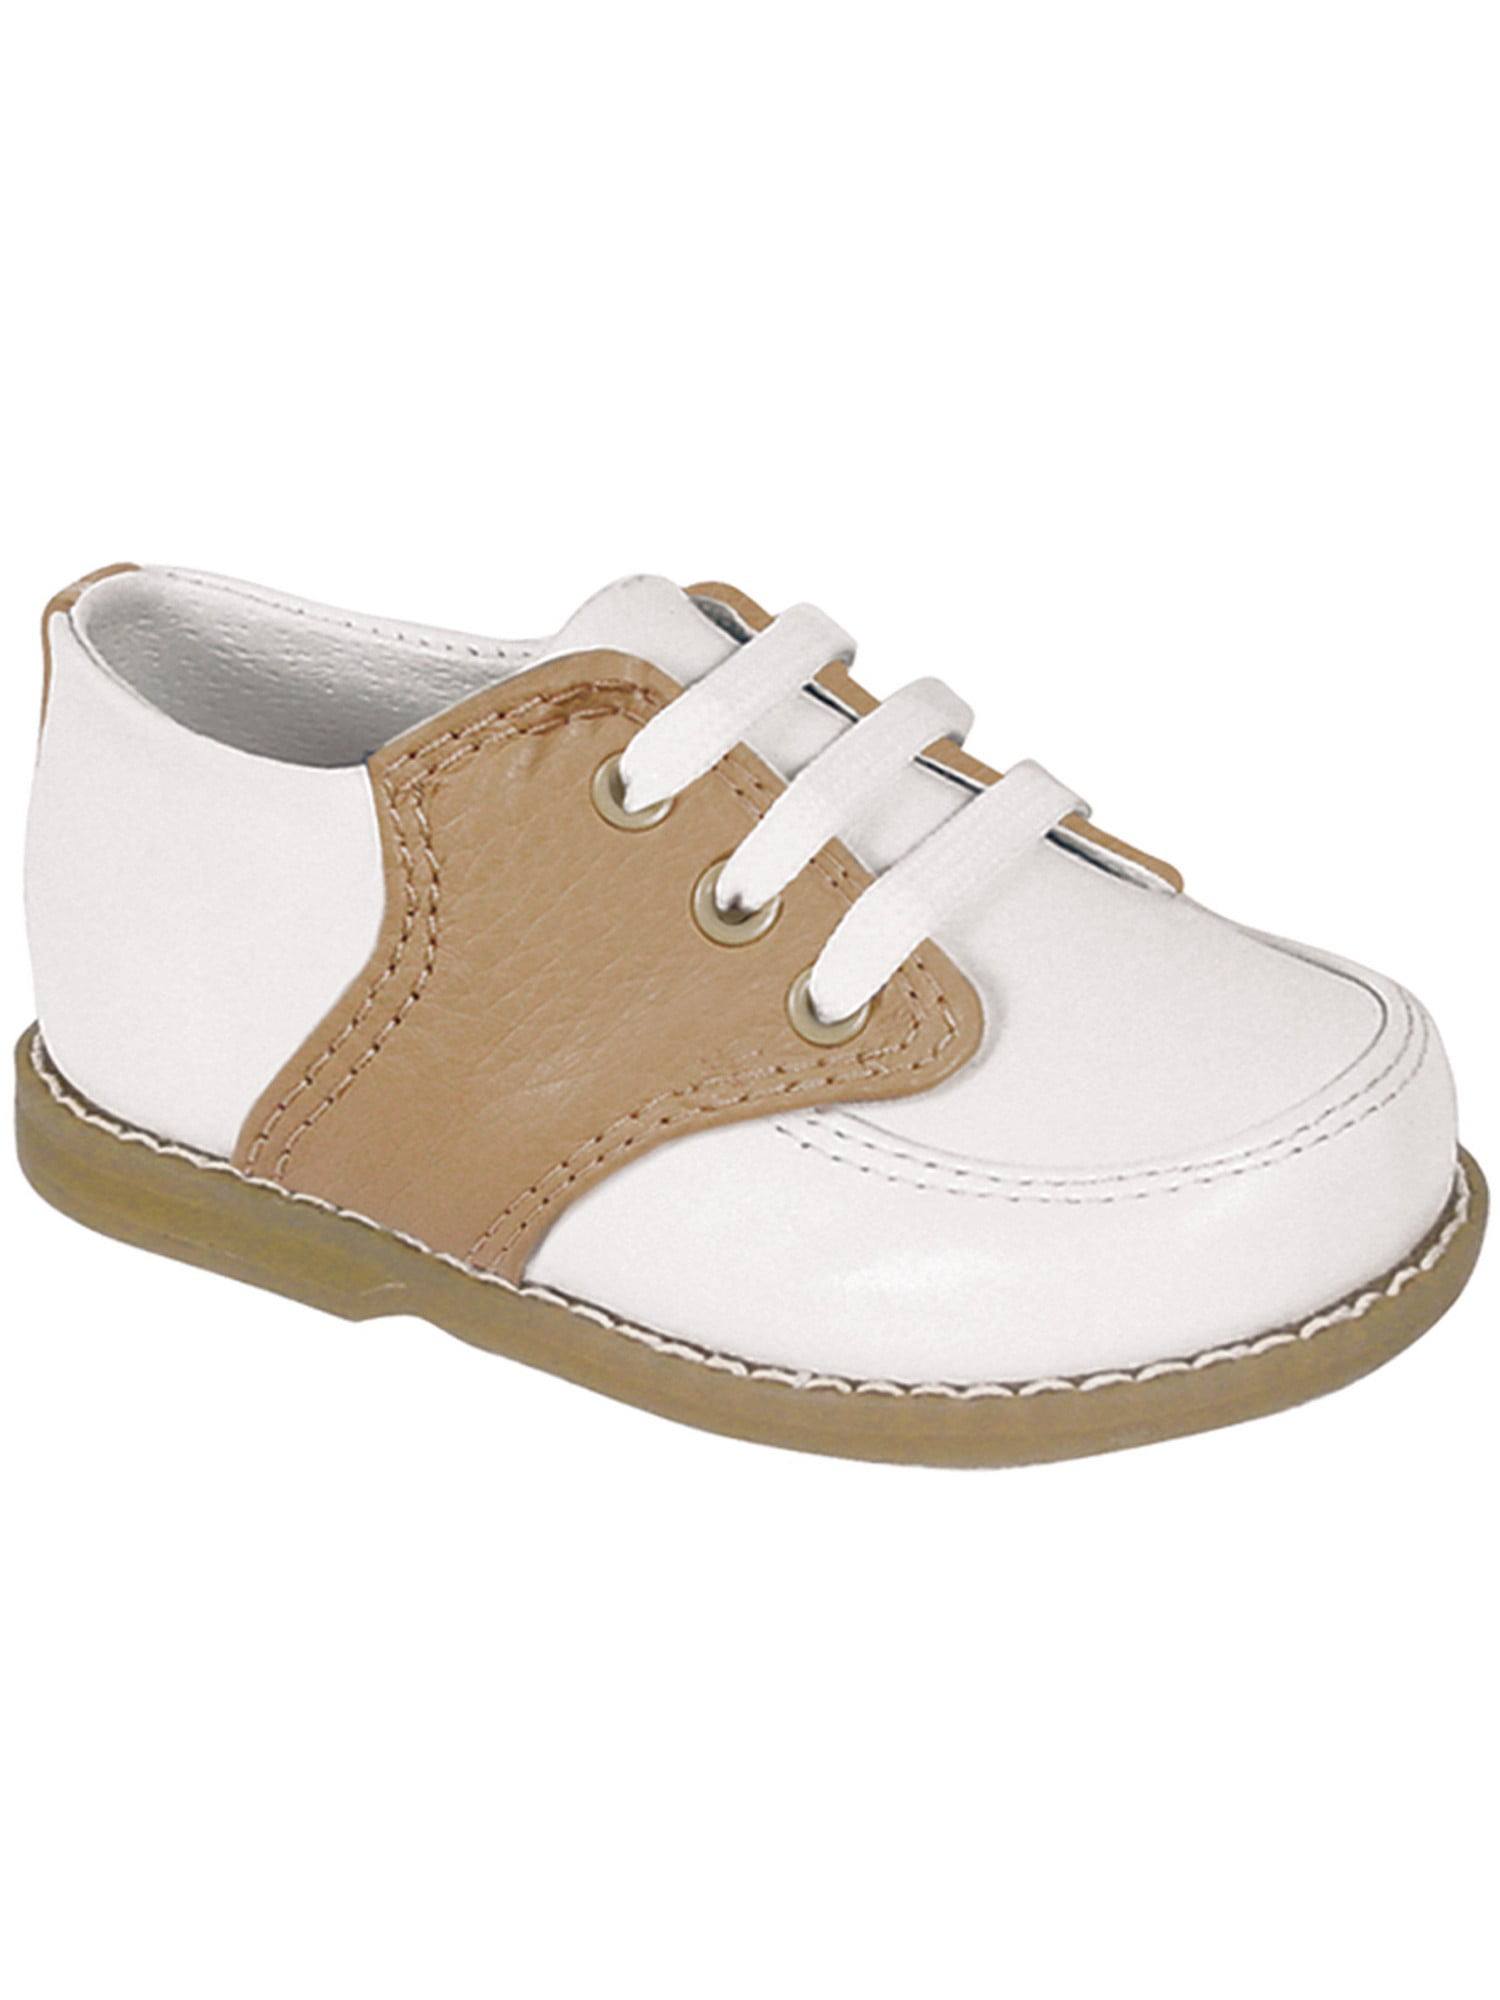 saddle oxford shoes for toddlers